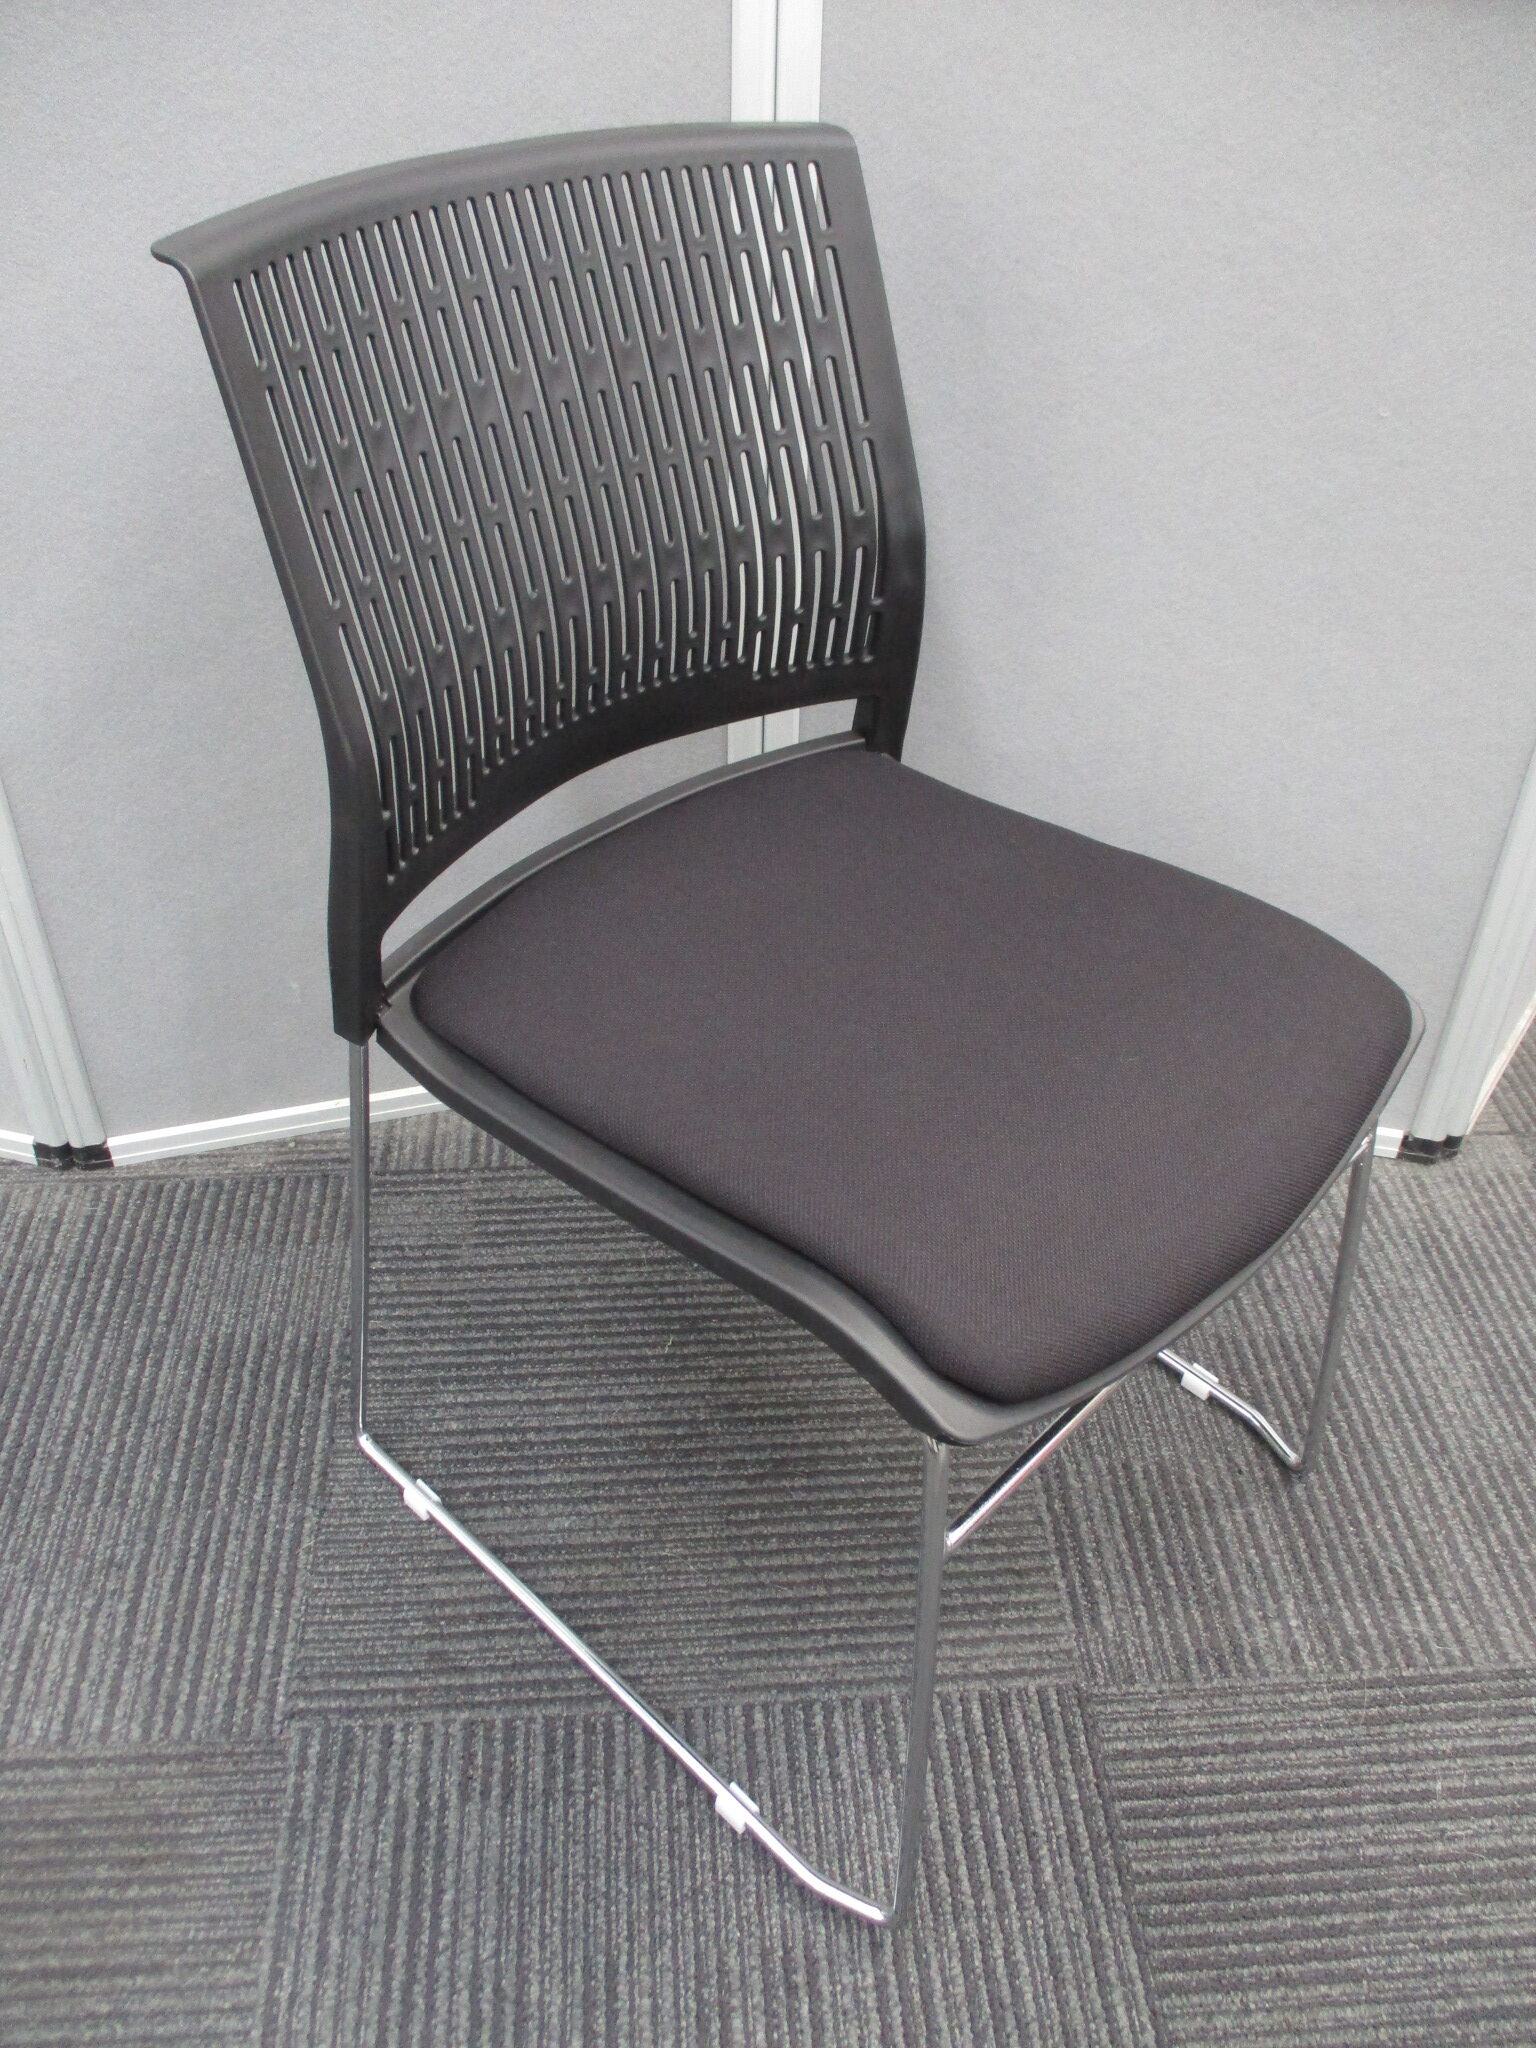 New Riva Fabric Padded Stacking Chairs $89